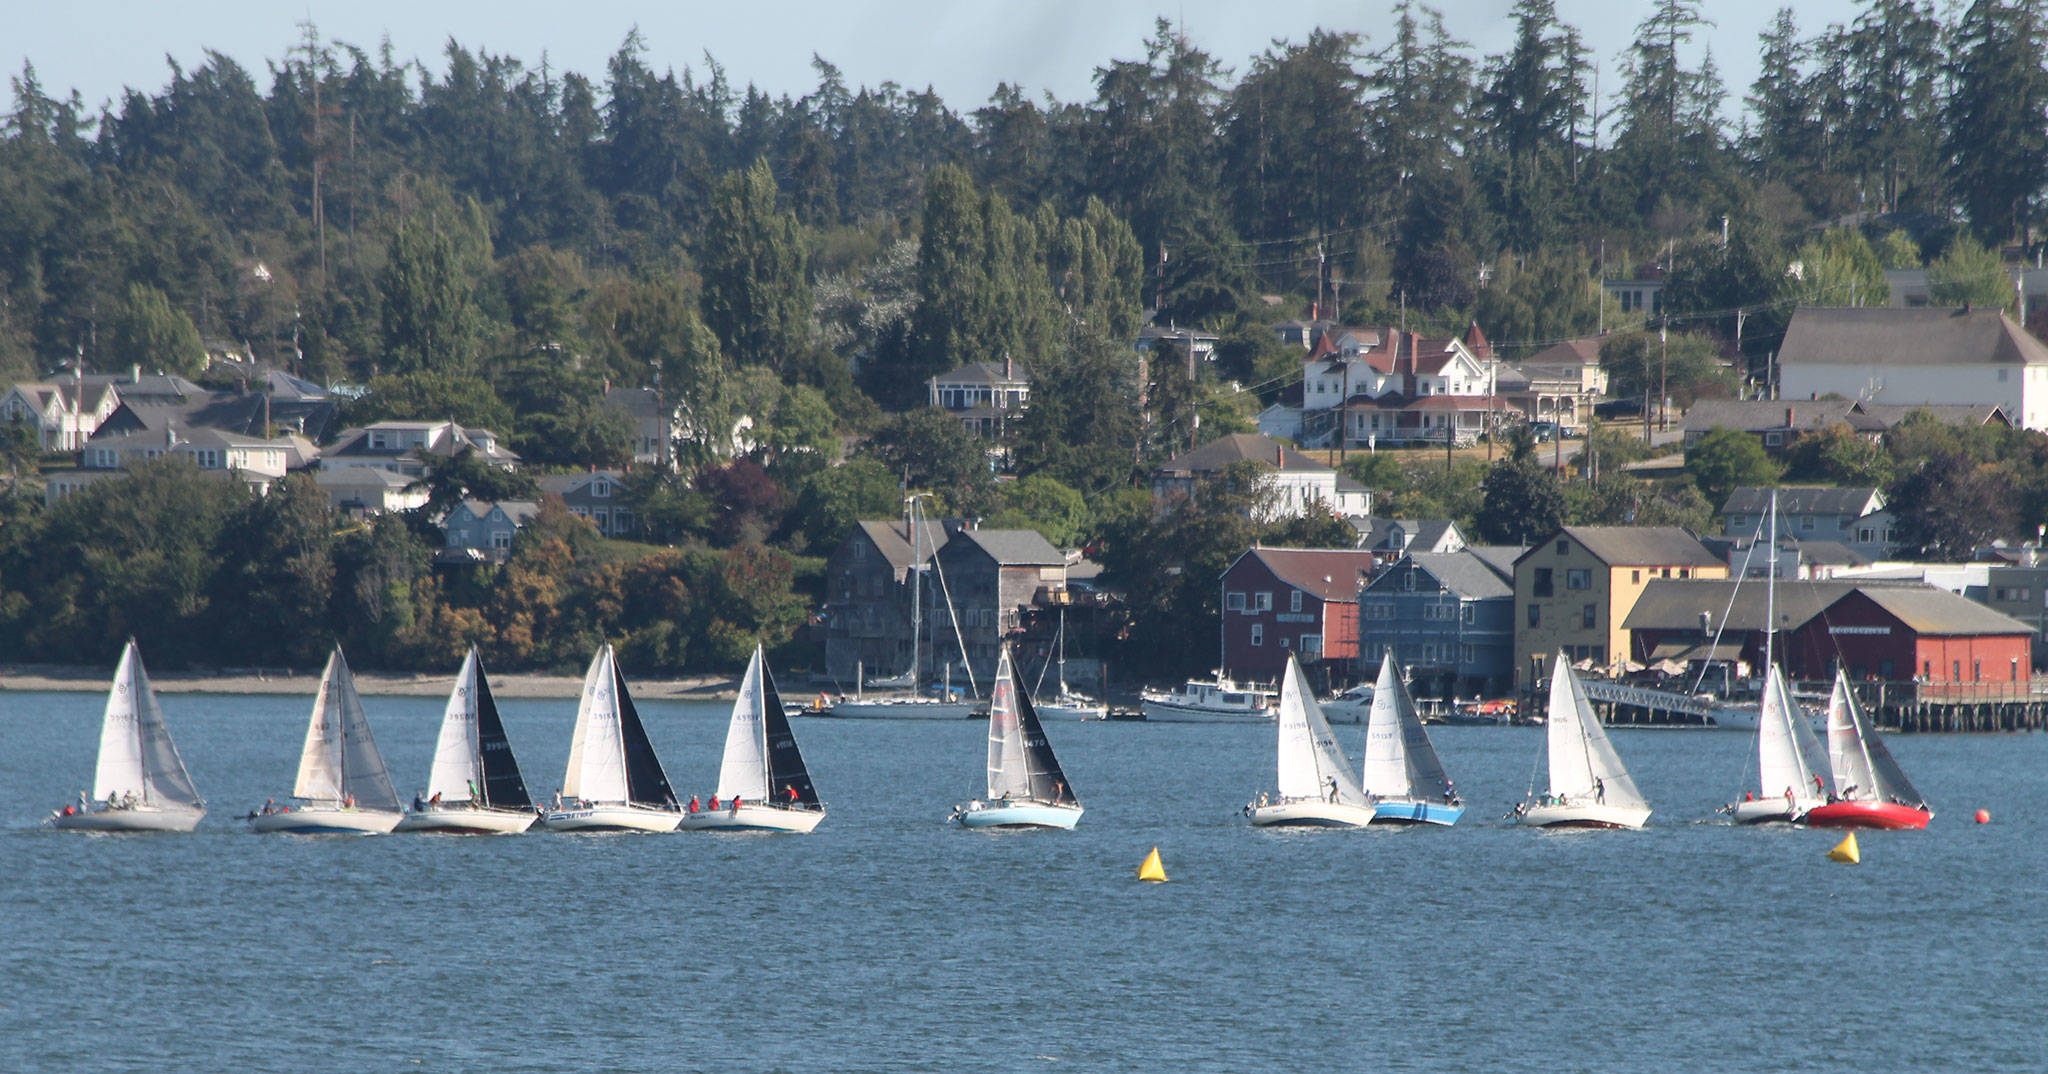 The fleets takes off at the beginning of one of Saturday’s races. (Photo by Jim Waller/Whidbey News-Times)